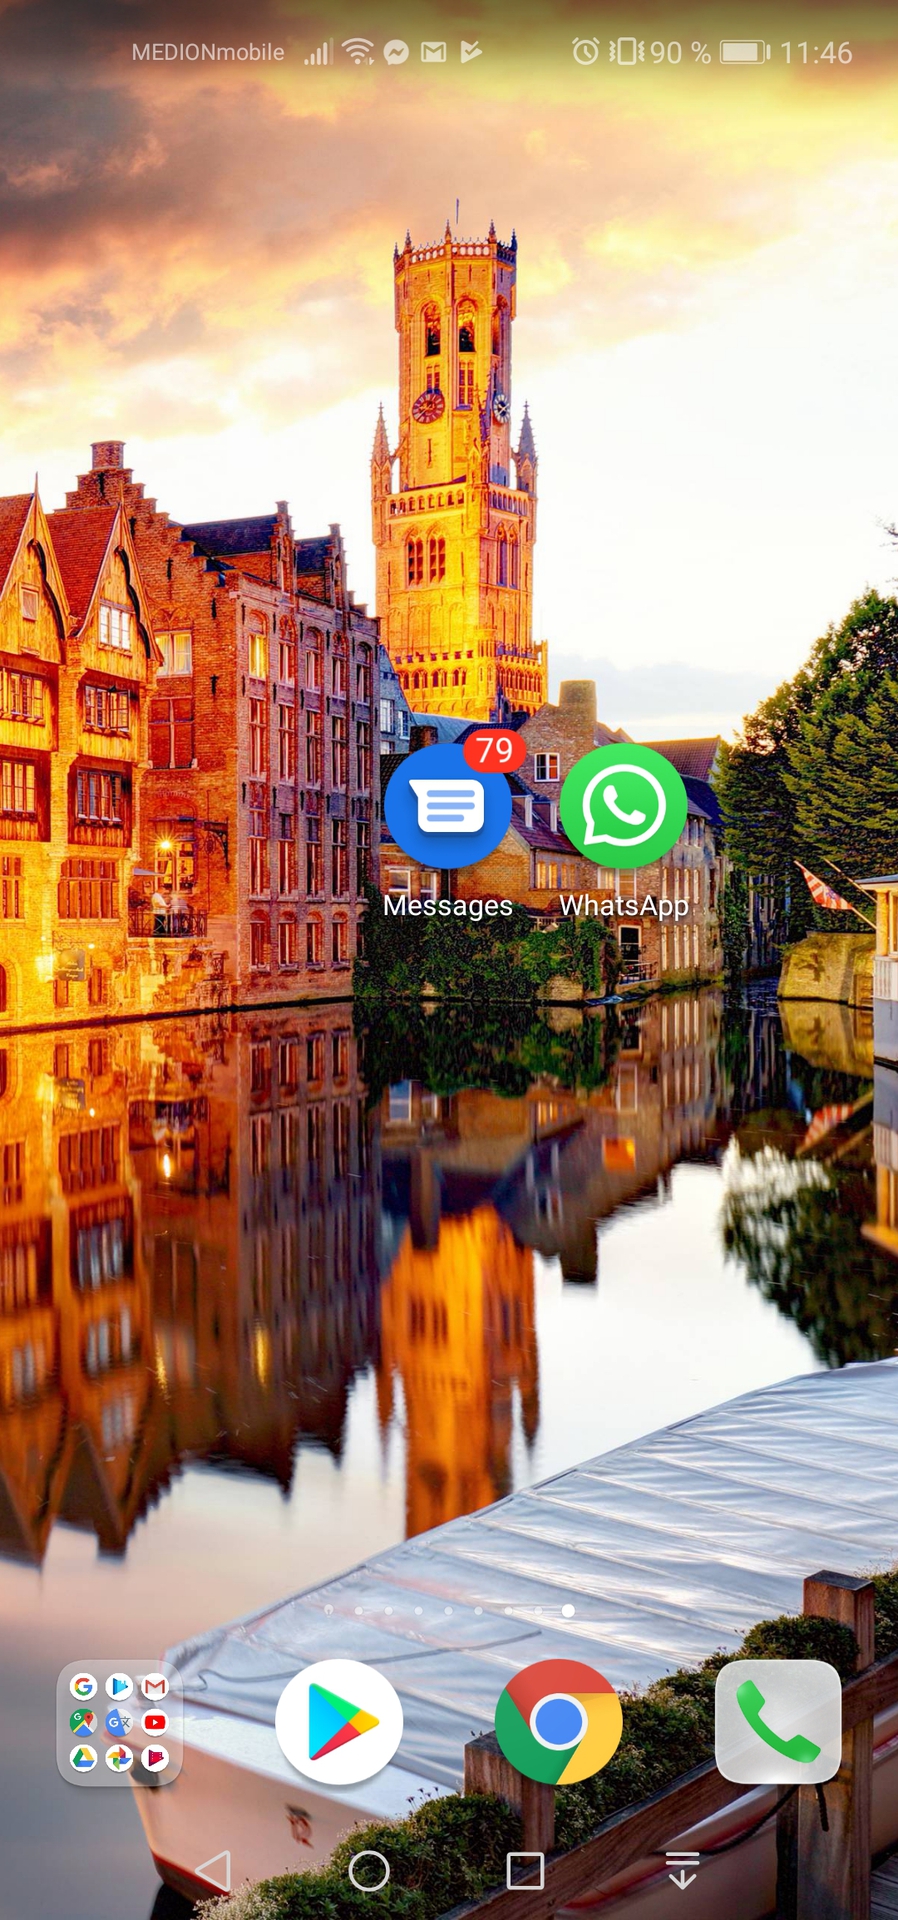 A screenshot of the WhatsApp and Android Messages icons on a smartphone.